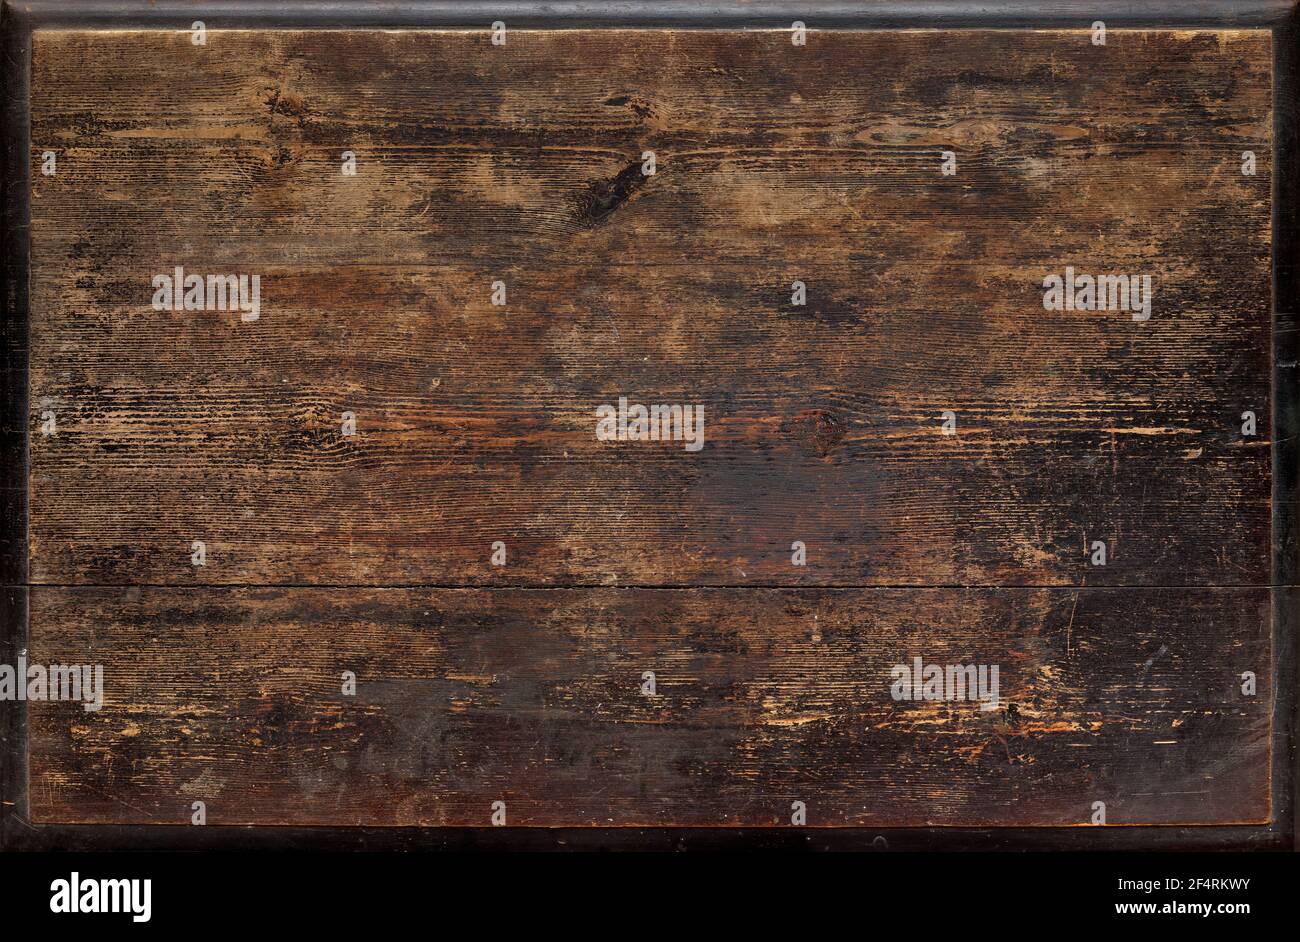 Backgrounds and textures: very old dark weathered wooden tabletop surface Stock Photo